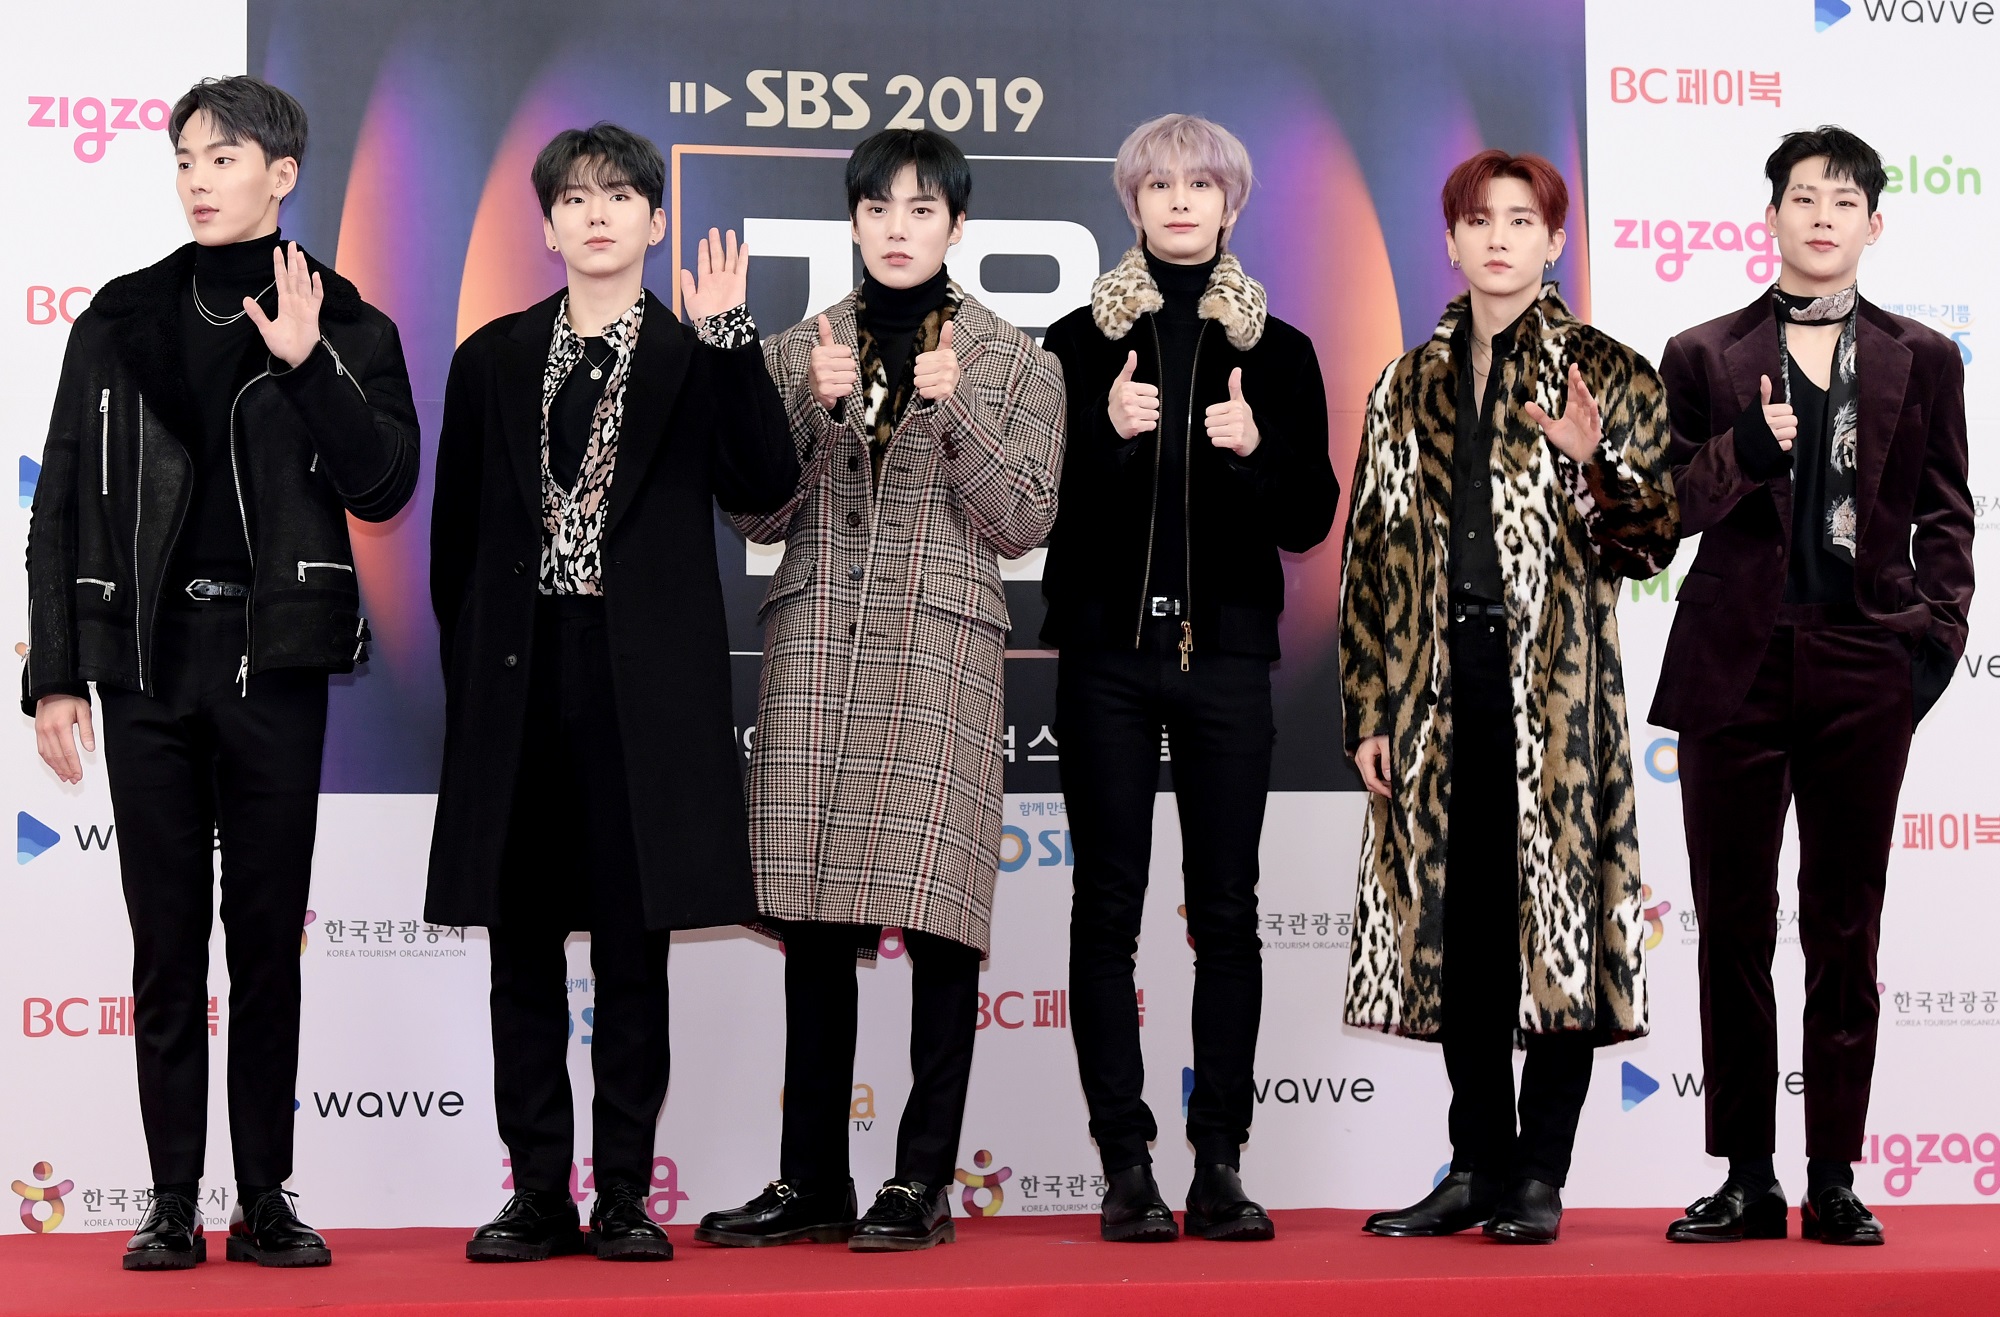 The members of the K-pop group Monsta X attend 2019 SBS Gayo Daejeon